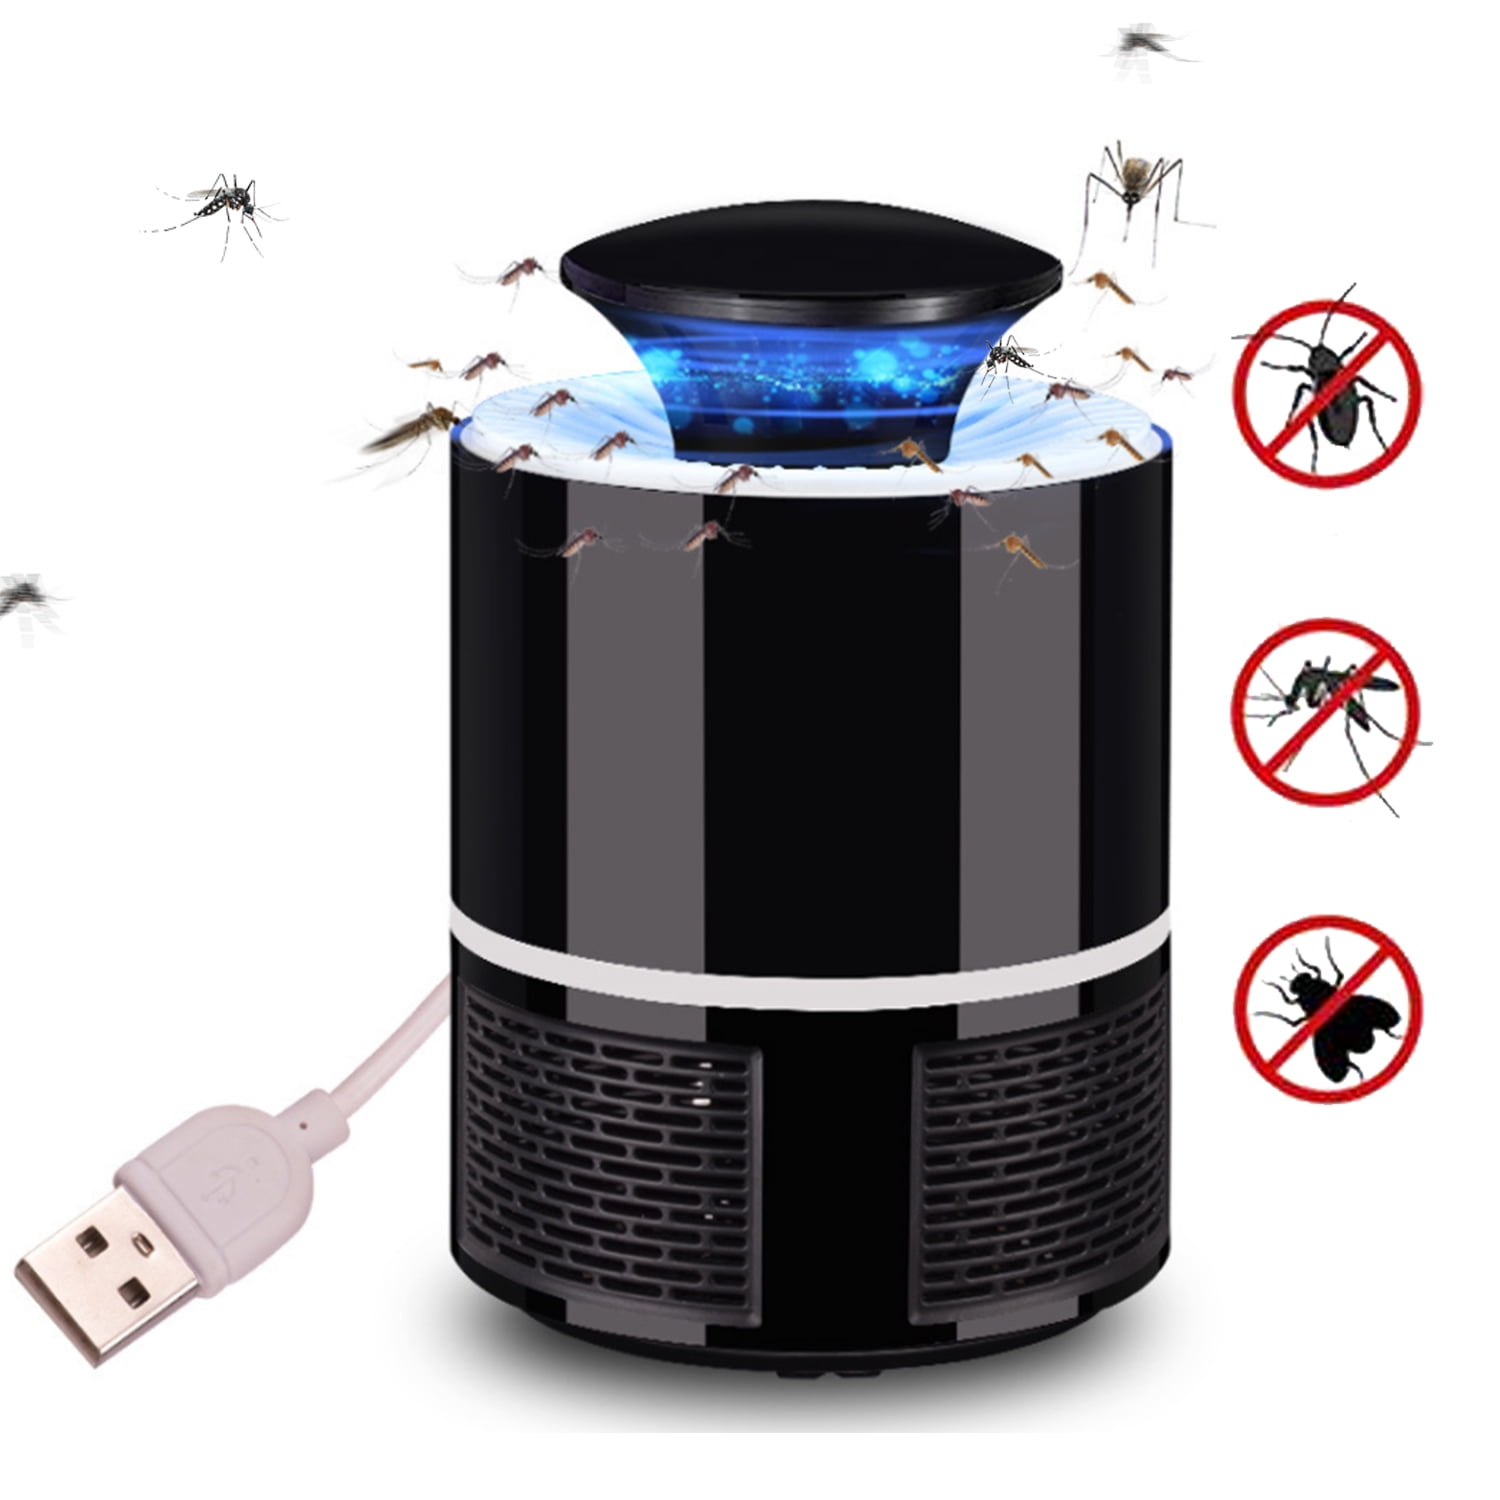 Details about   USB Electric Mosquito Killer Bug Light Home Insect Fly Zapper Trap Catcher Lamp 